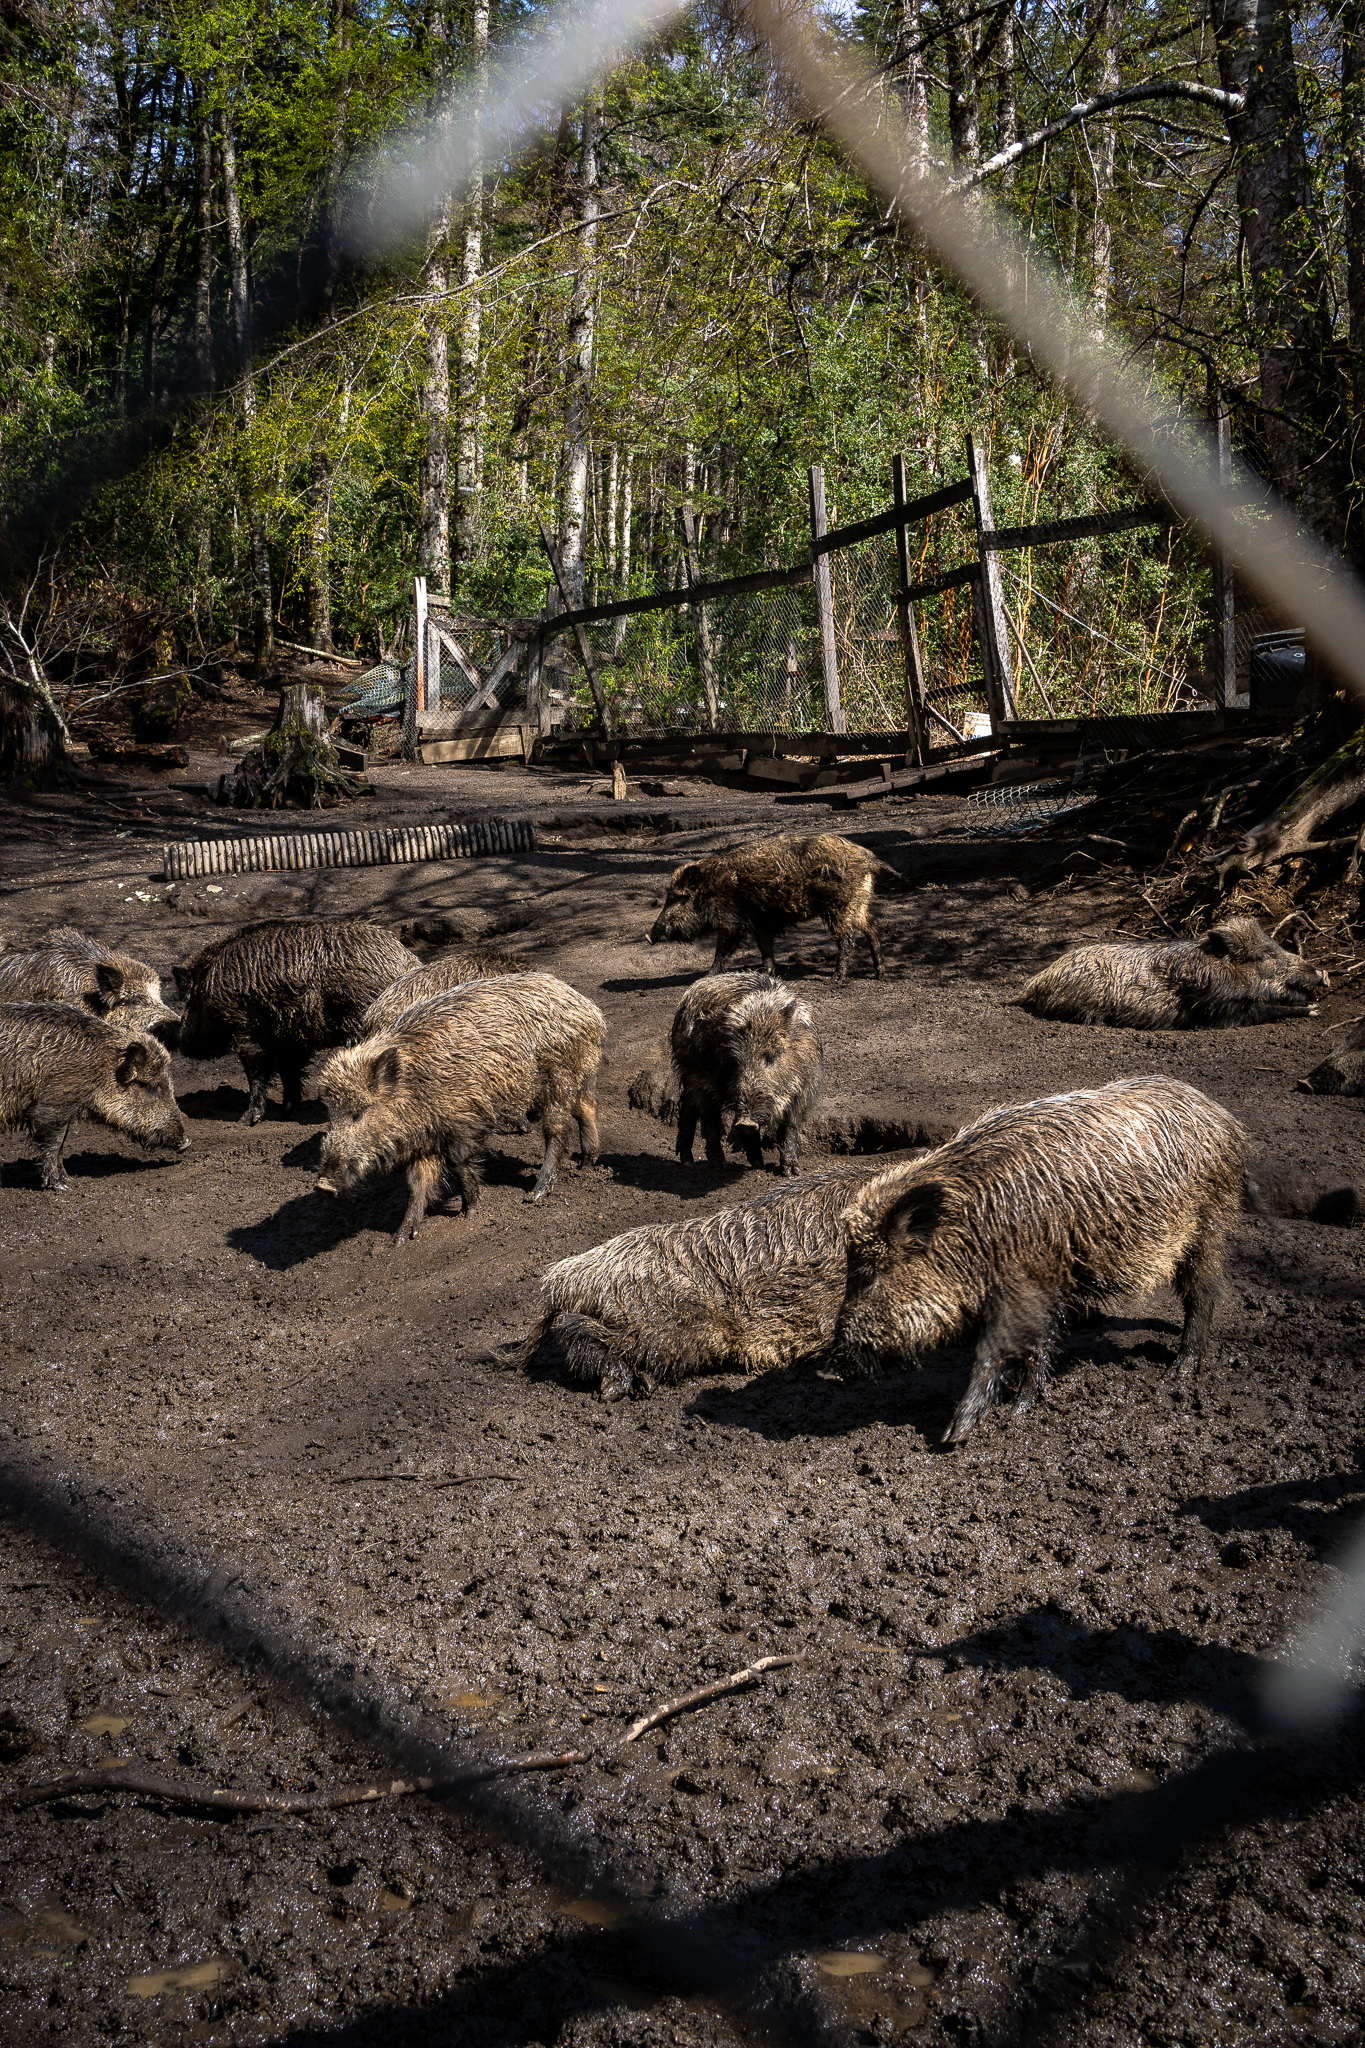 jabalies Boars at the deer park huilo huilo chile